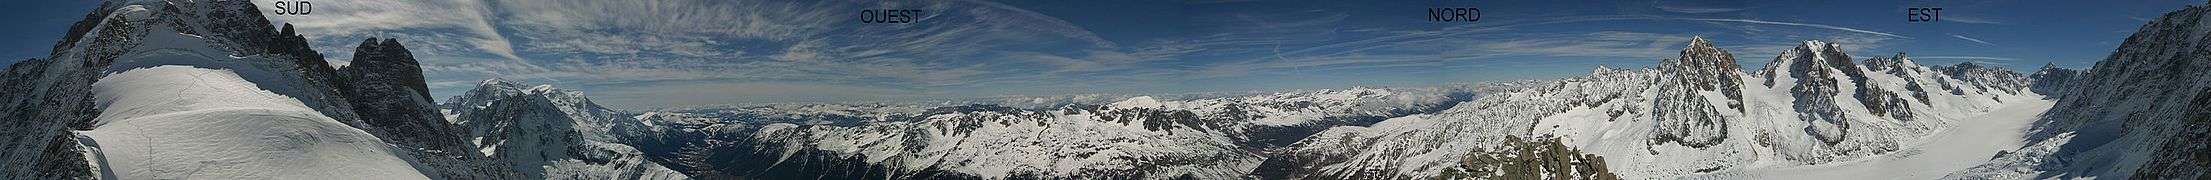 mountains of the Mont Blanc massif seen from the northeast